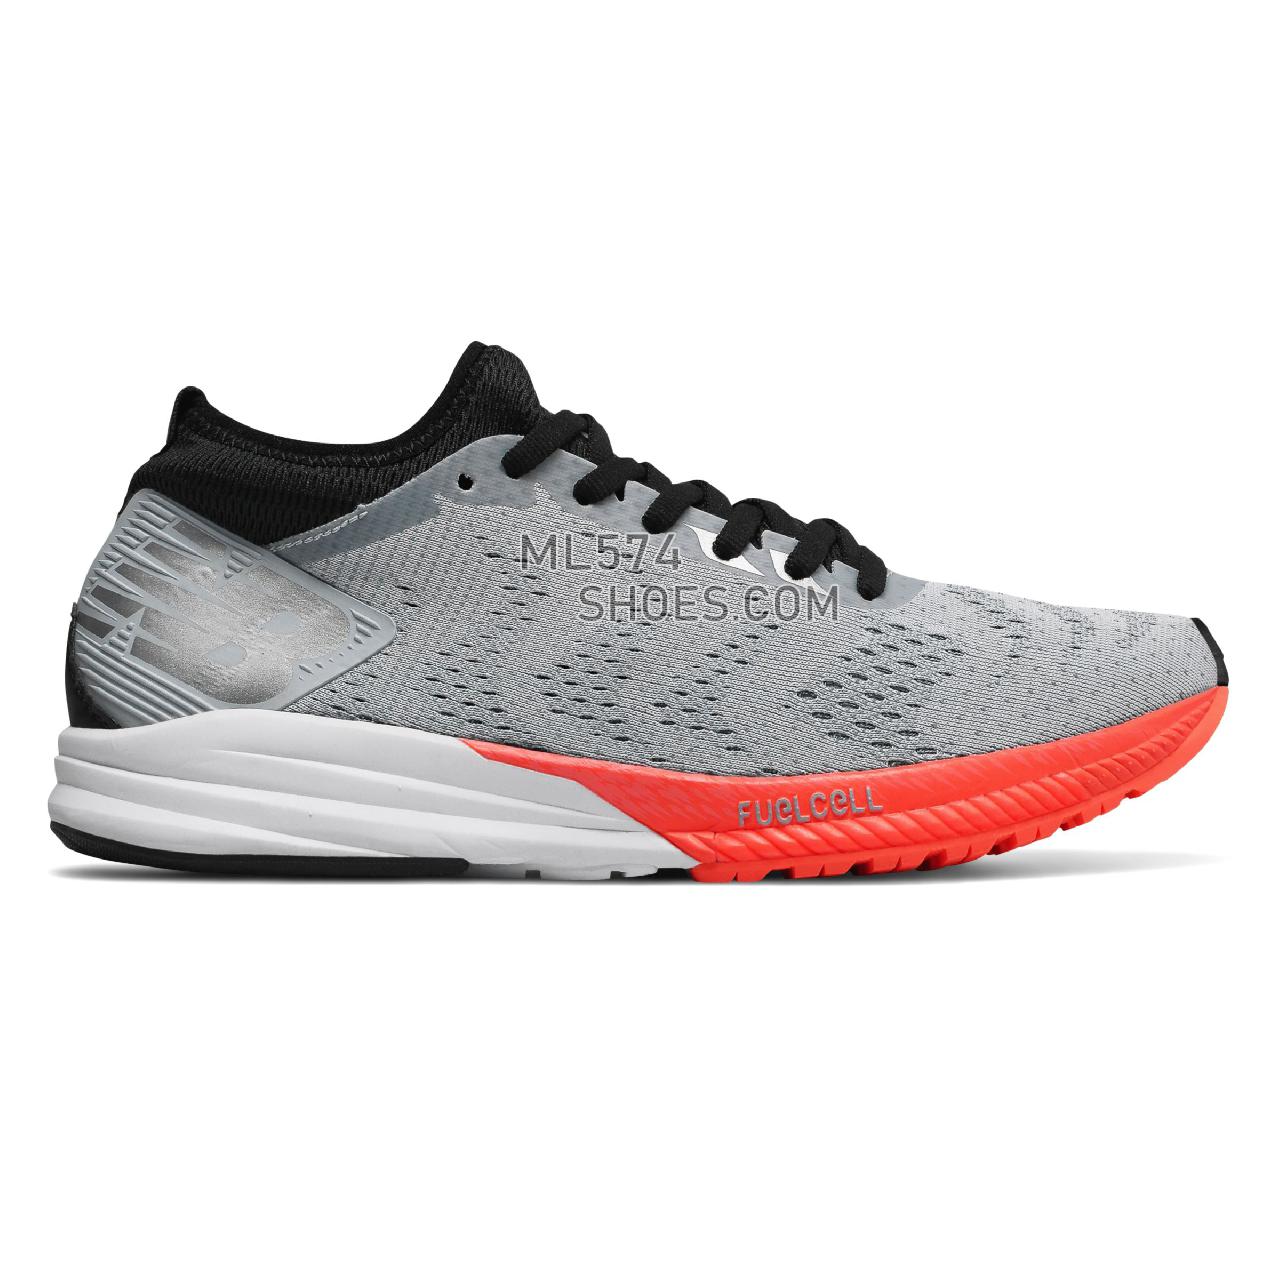 New Balance FuelCell Impulse - Women's  - Running Light Cyclone with Dragonfly - WFCIMGP